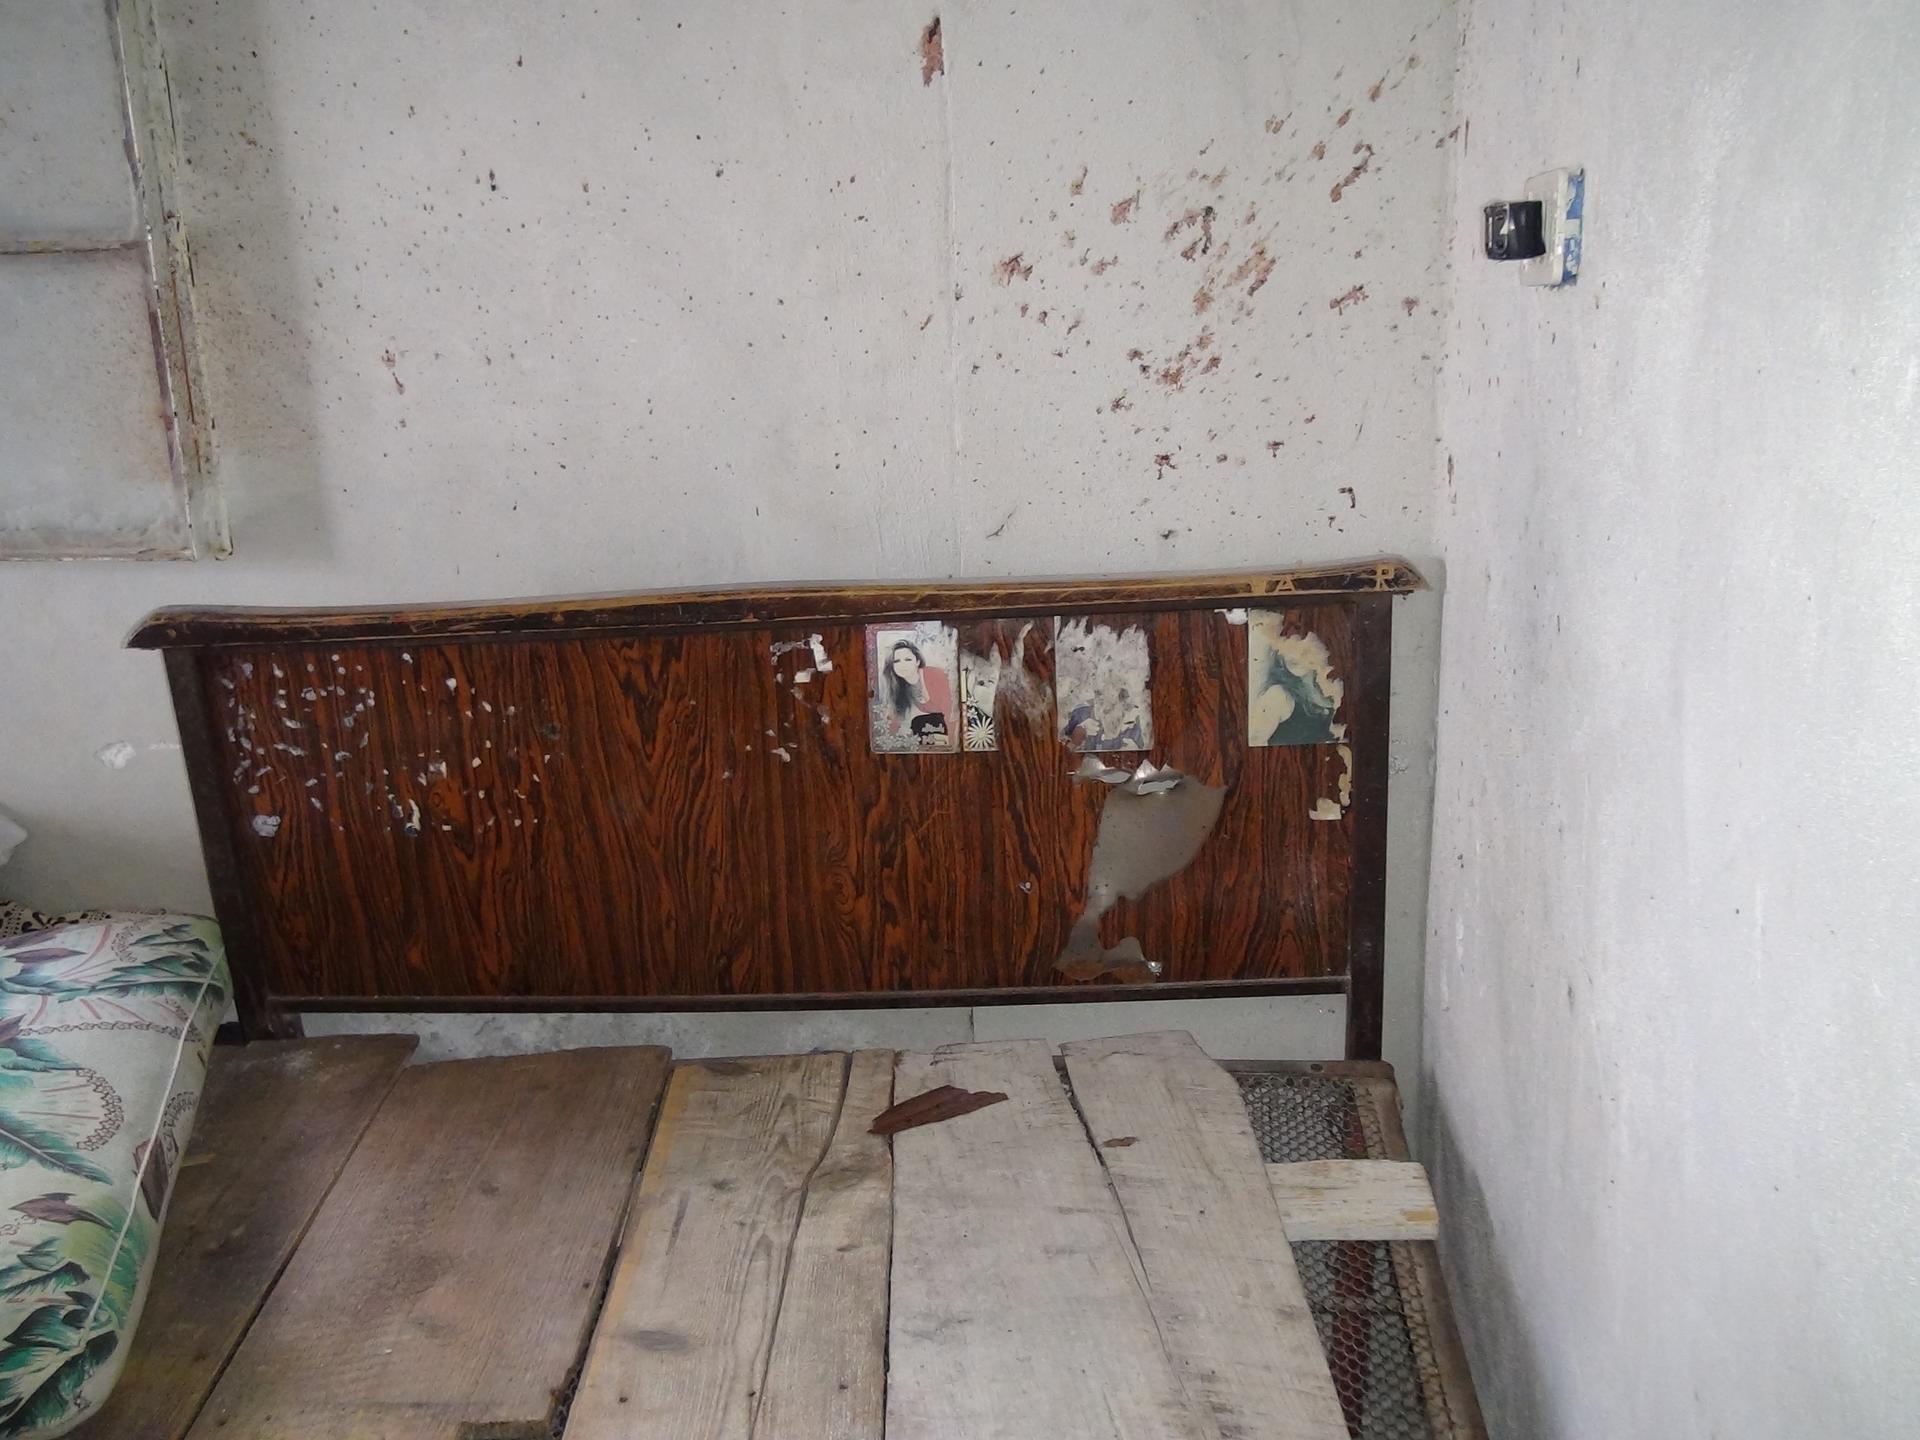 Blood splatter above the bed of Safwan Shebli, 23, who was killed by opposition groups during an August 4th offensive in Barouda village, northern Syria; photo taken September 8, 2013.